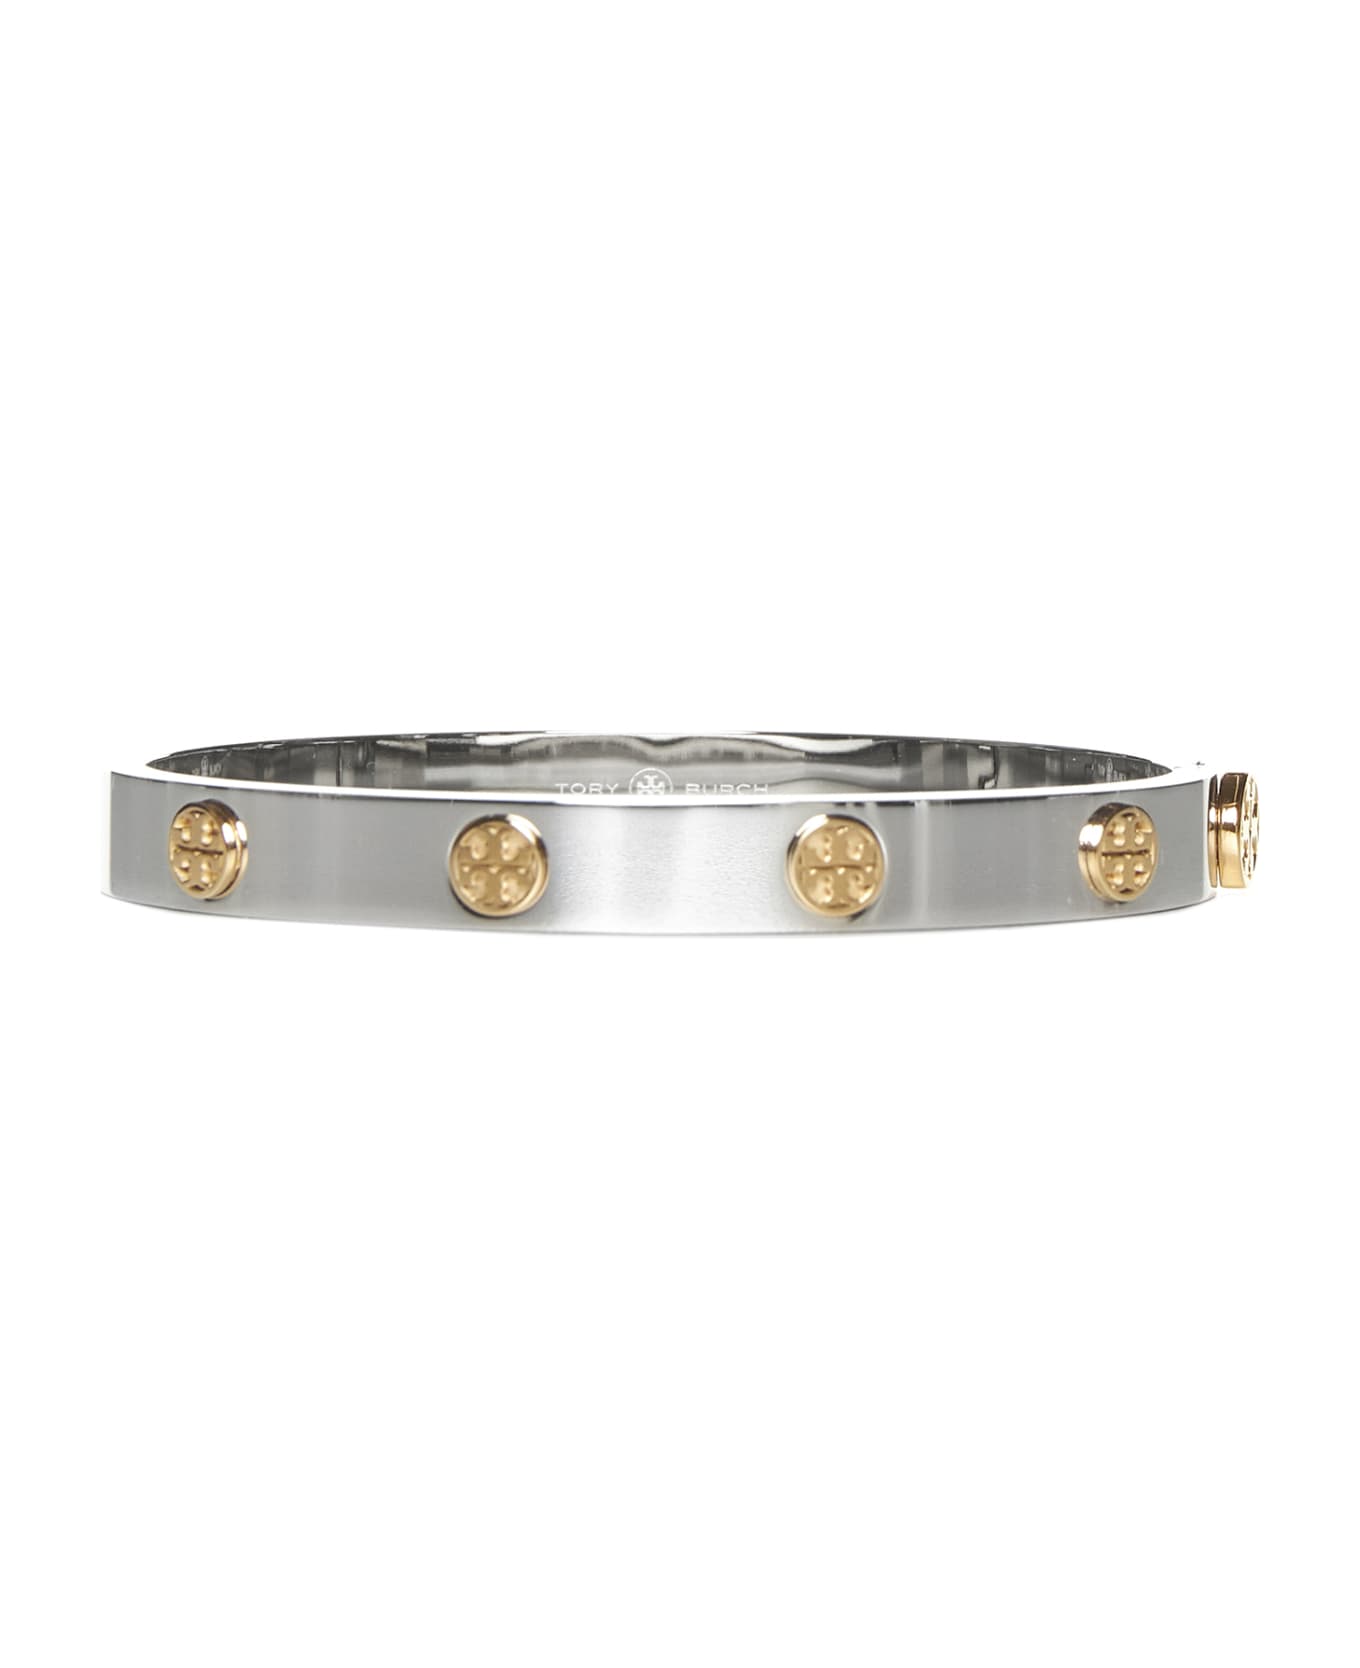 Tory Burch Steel Bracelet With Contrasting Logo - Tory silver / tory g ブレスレット